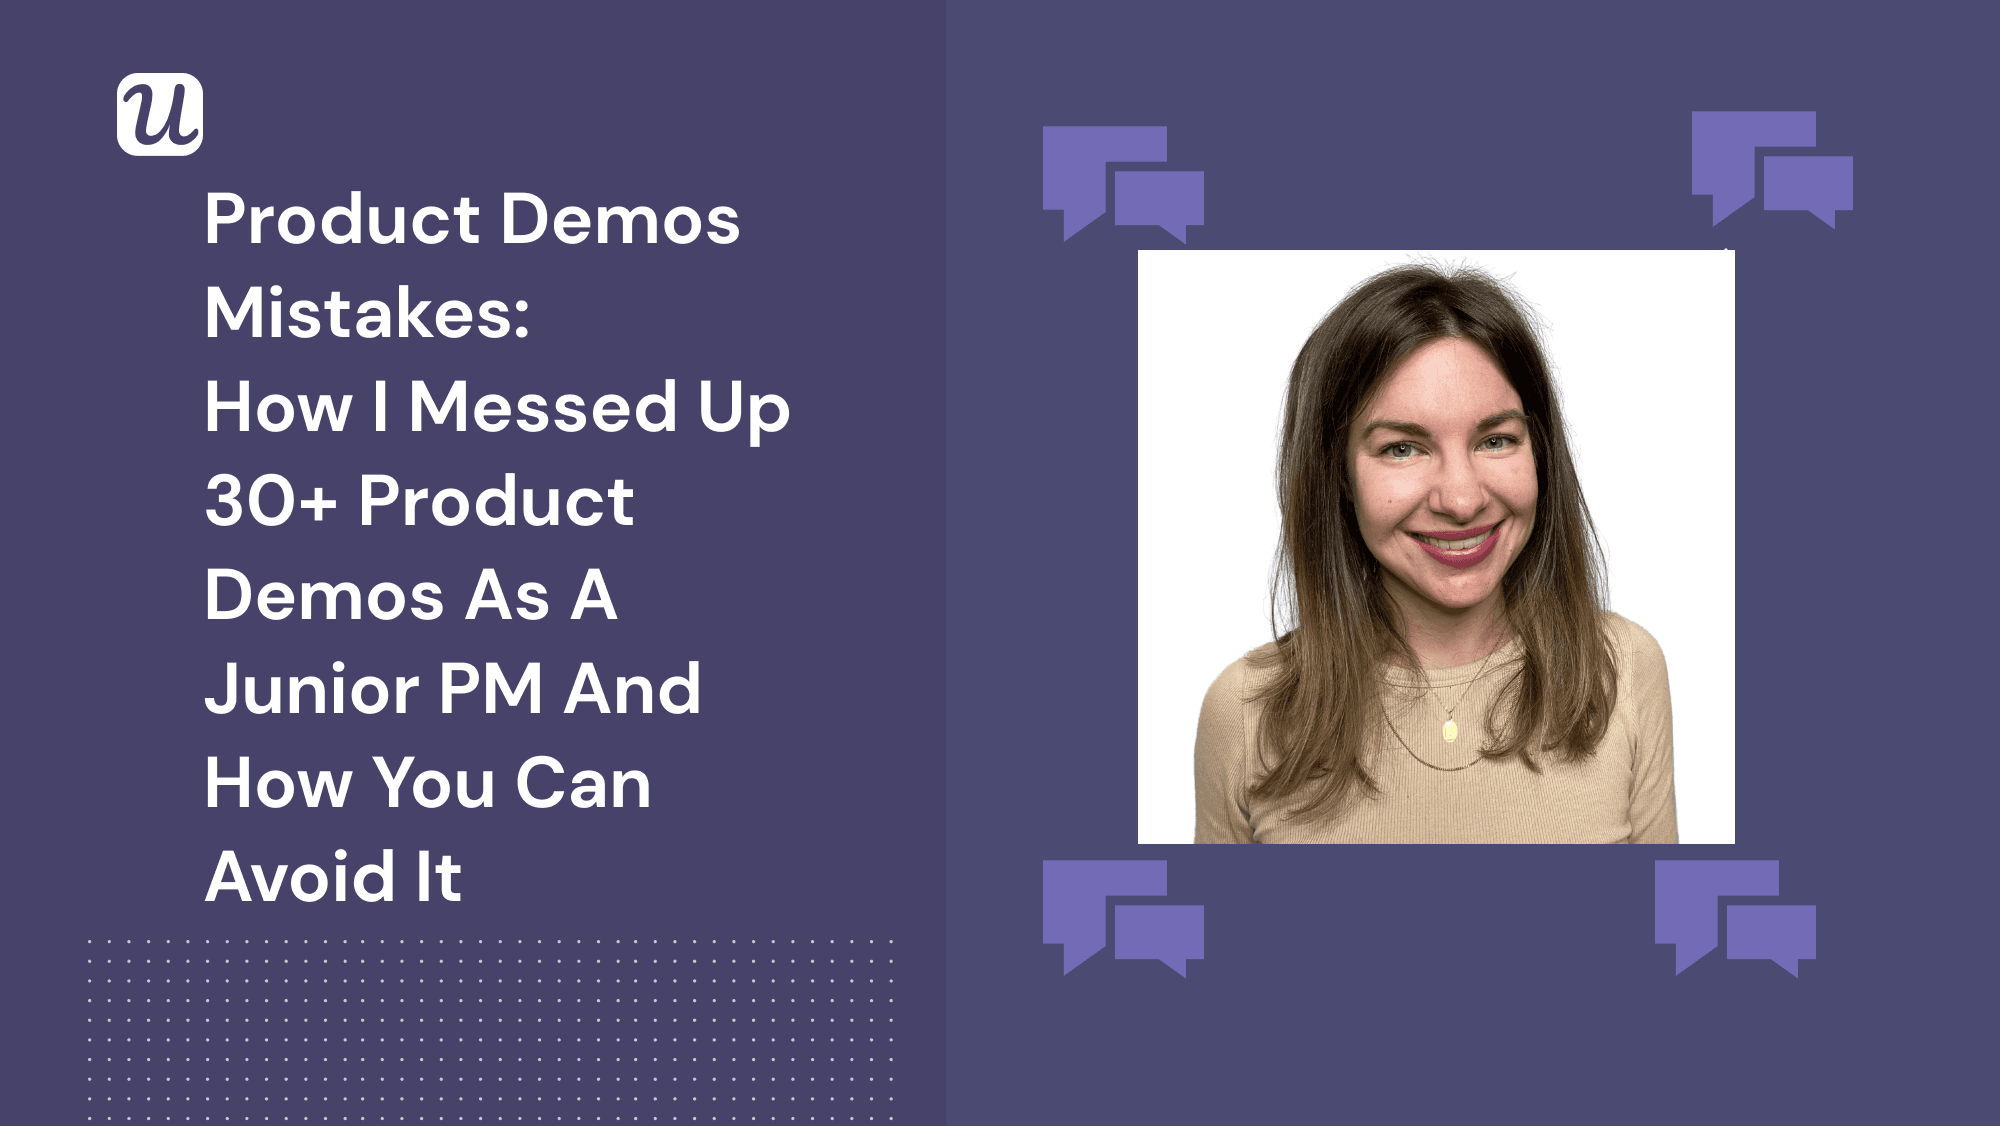 Product Demos Mistakes: How I Messed Up 30+ Product Demos as a Junior PM and How You Can Avoid It